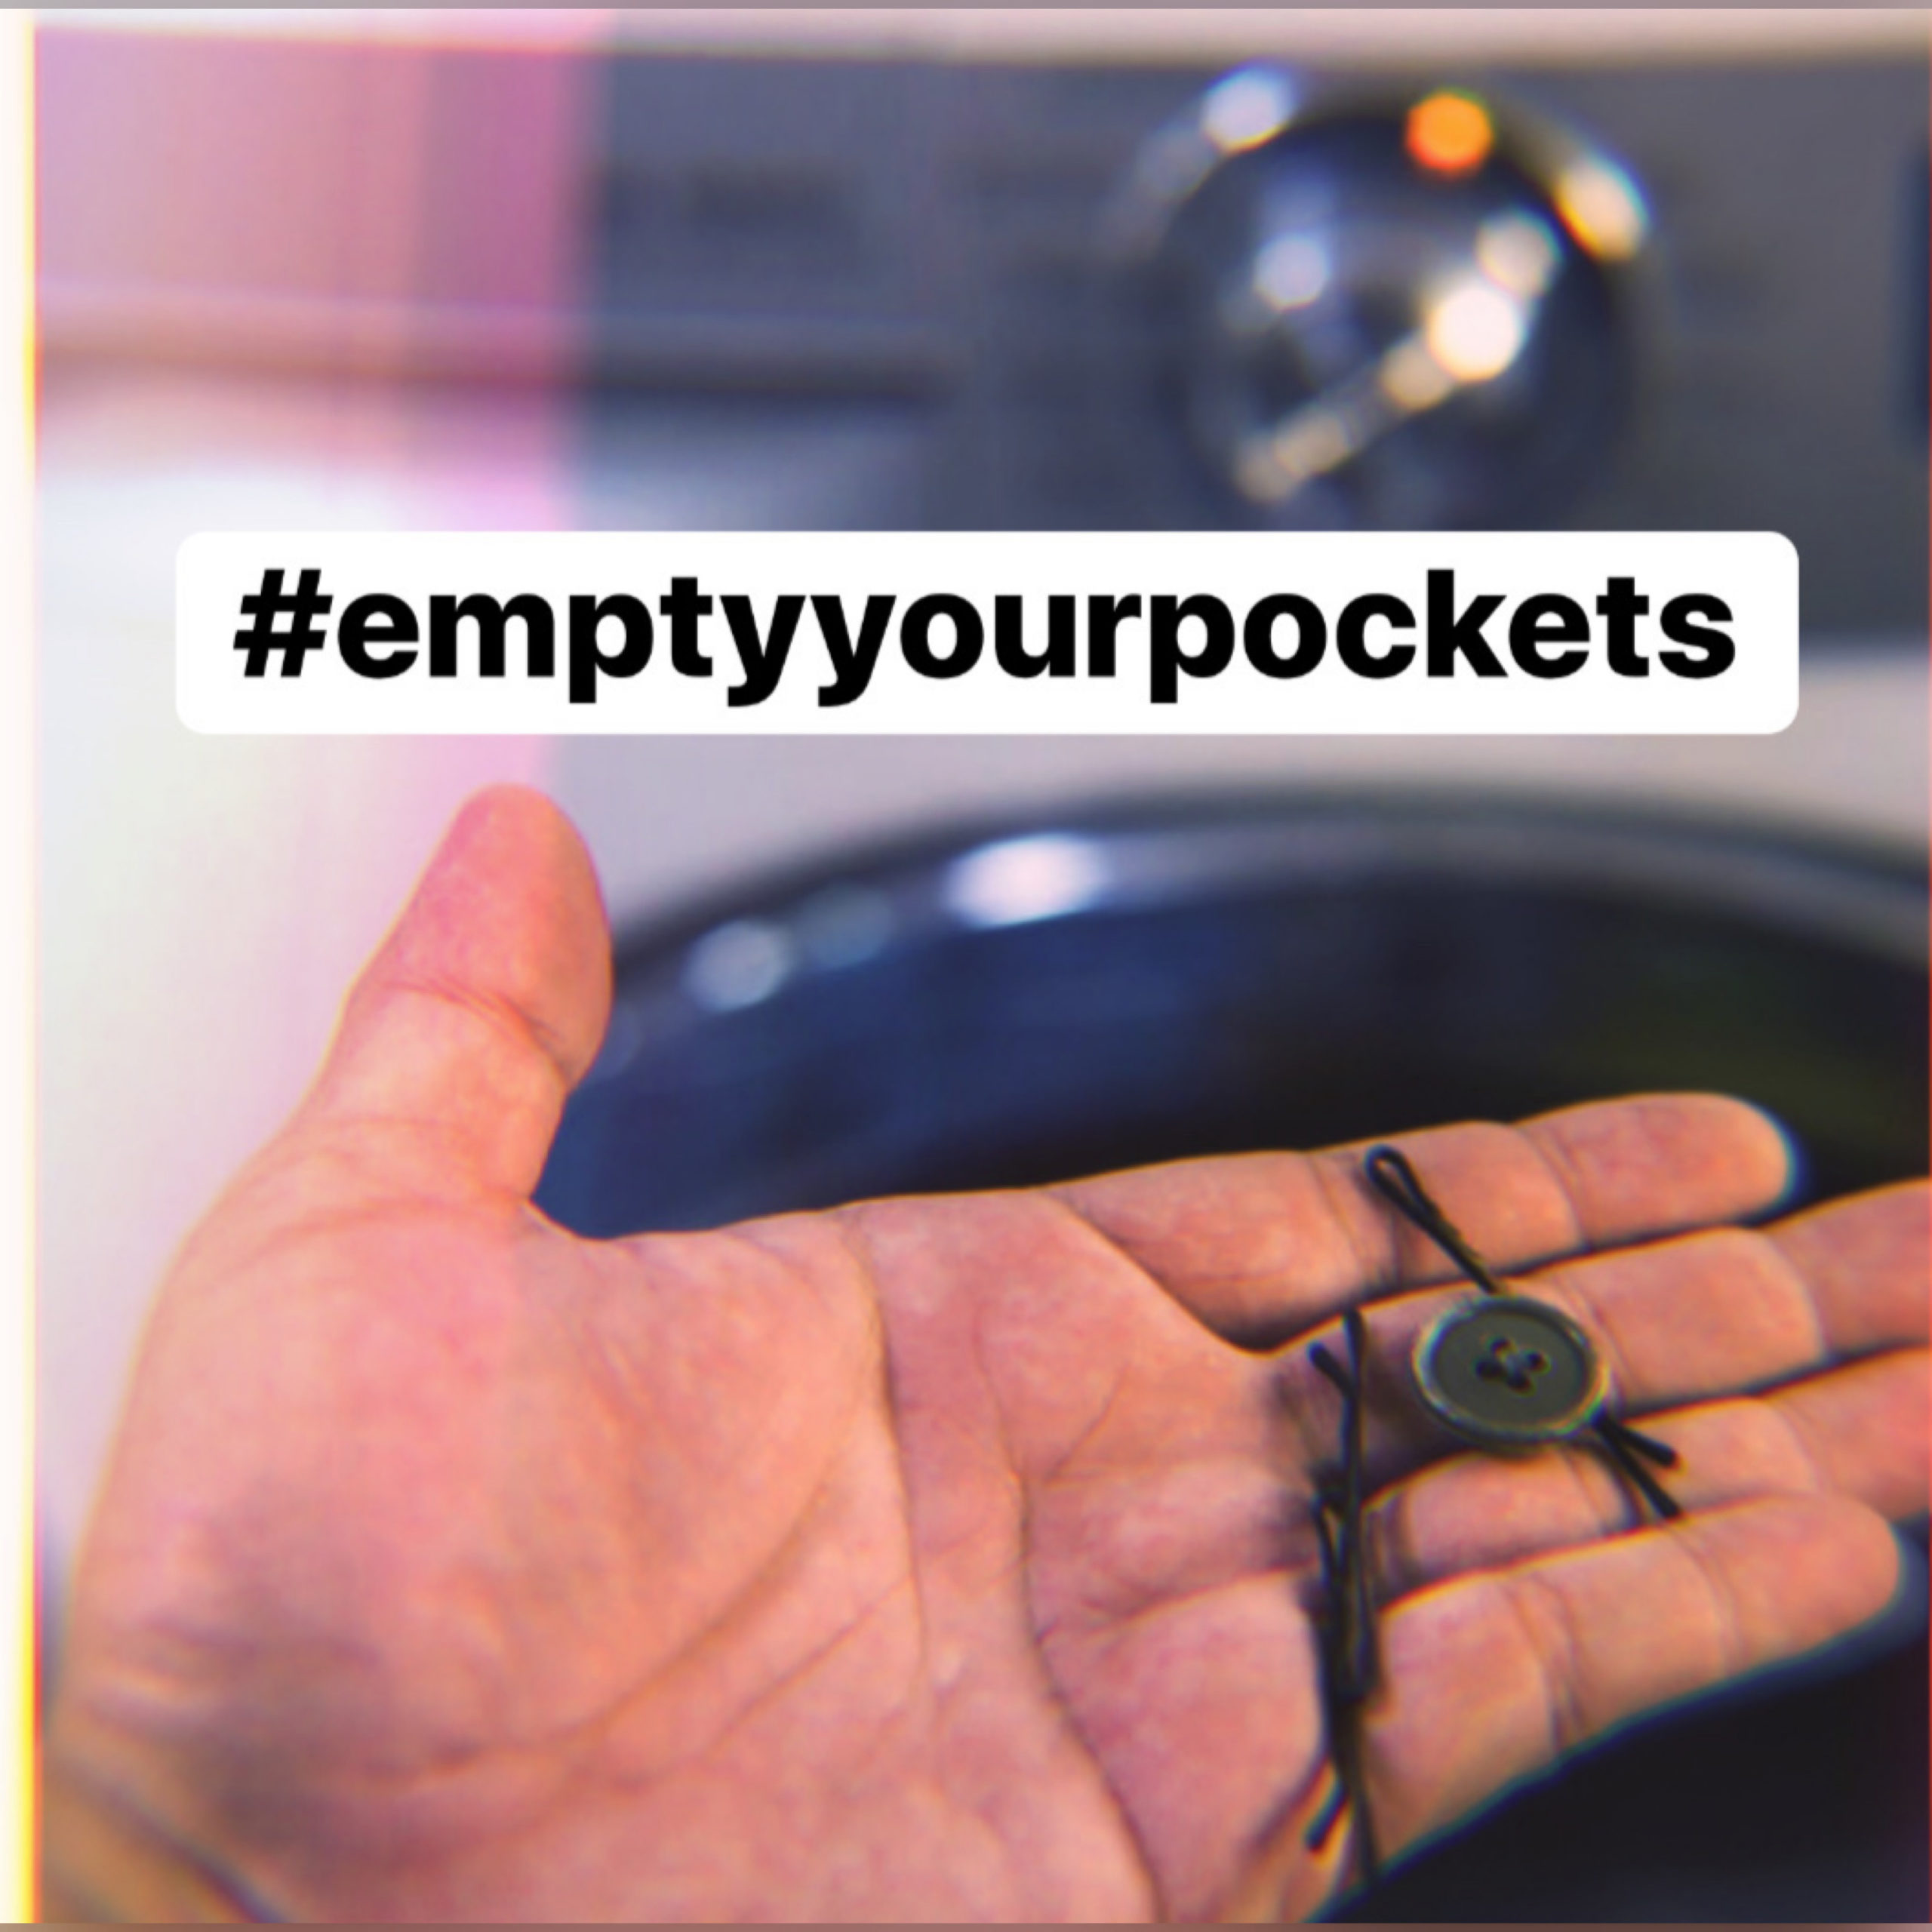 Empty Your Pockets